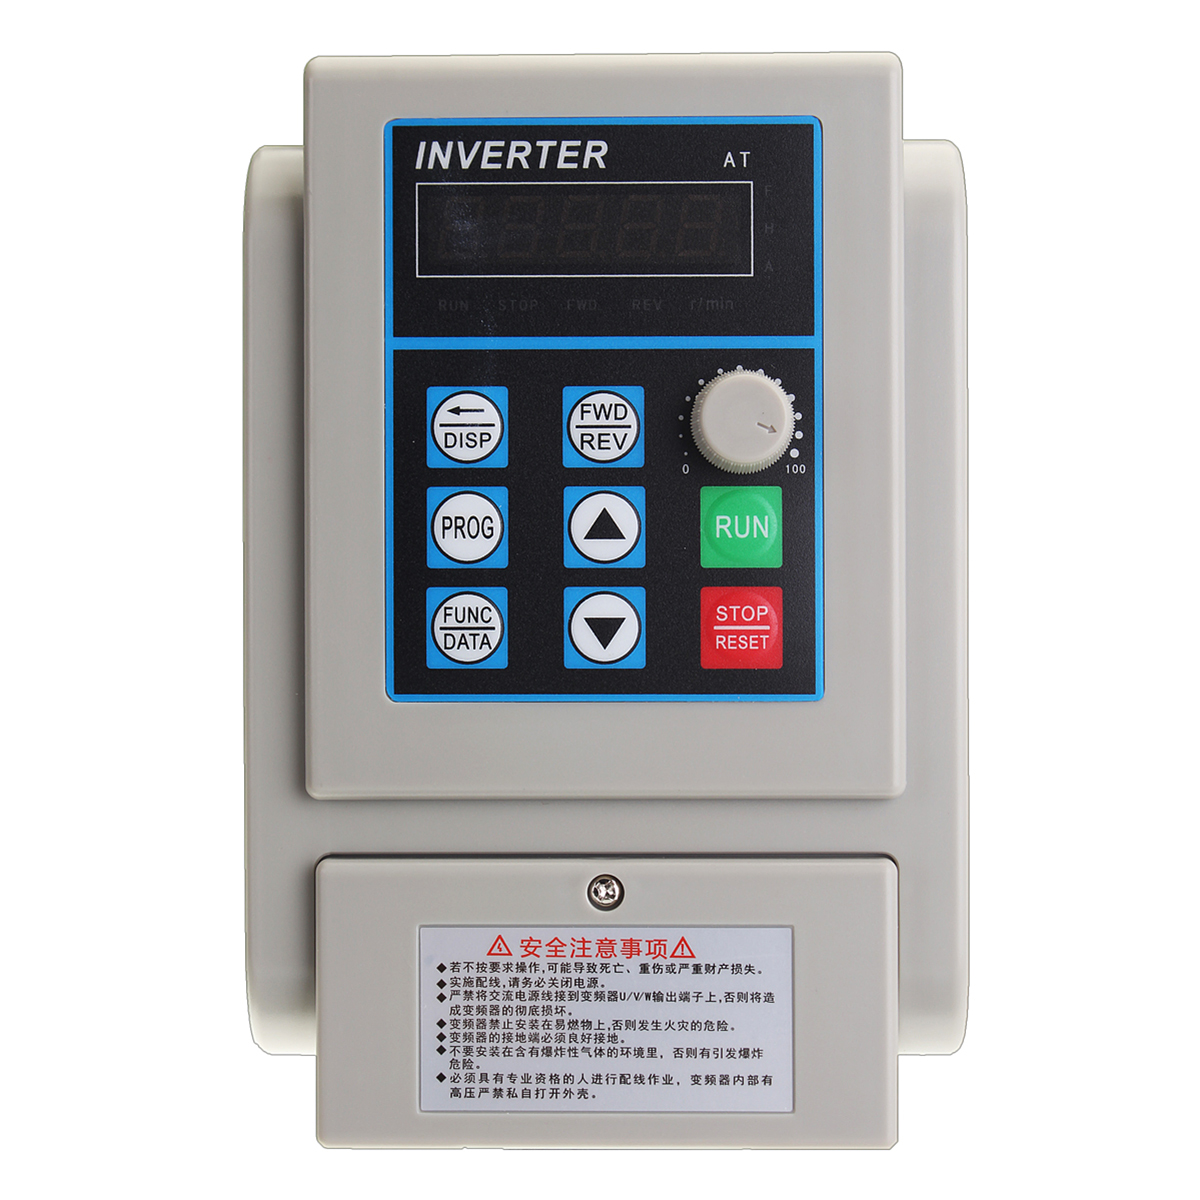 4KW-220V-20A-Single-Phase-Input-3-Phase-Output-PWM-Frequency-Converter-Drive-Inverter-5HP-VFD-VSD-1286175-2